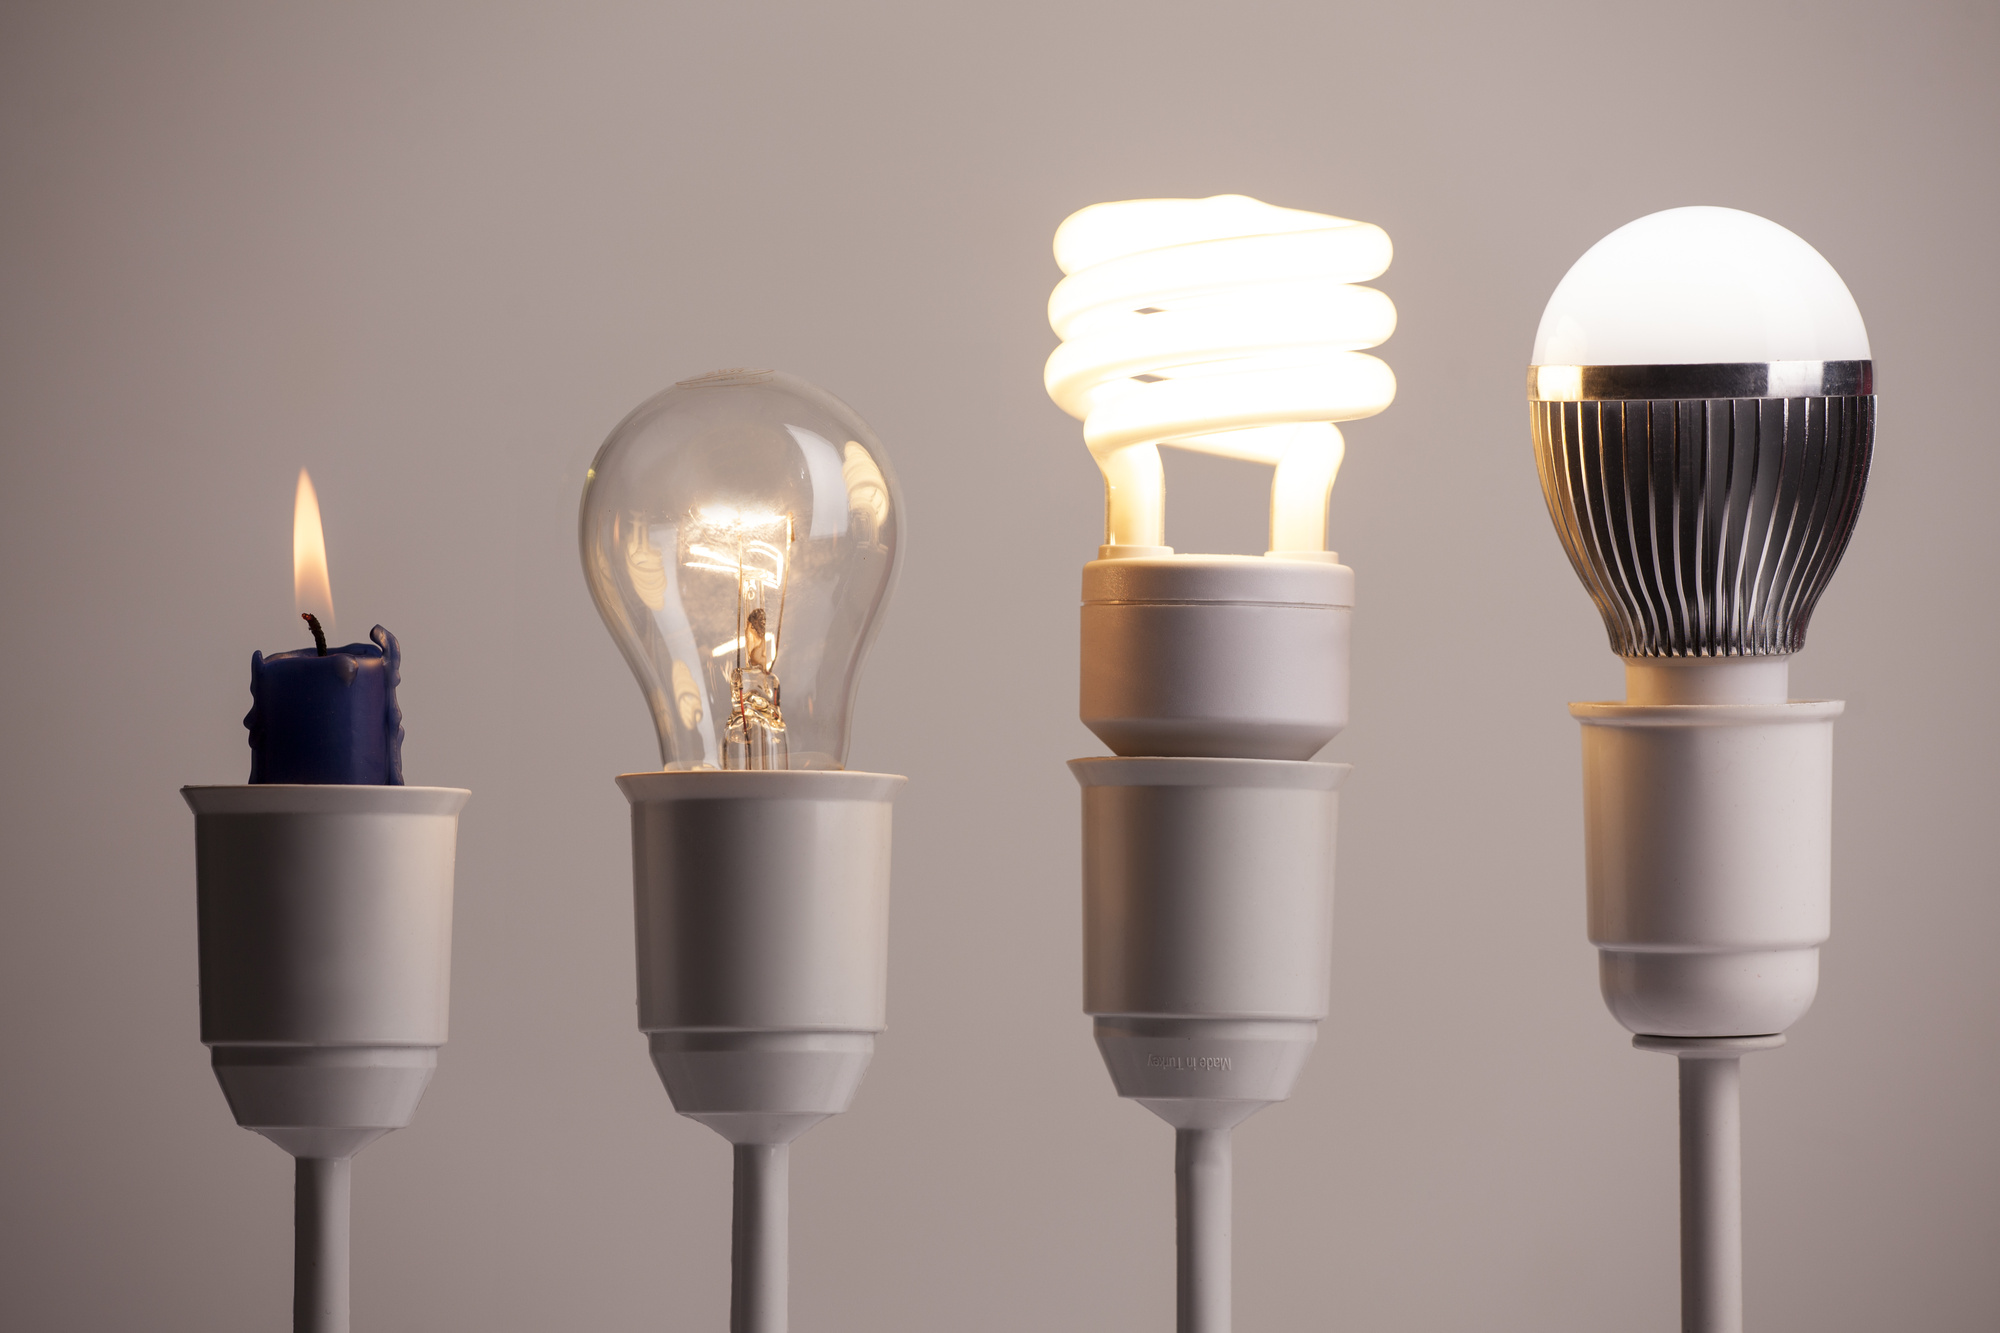 A19 Bulb vs E26 Bulb – What’s the Difference?